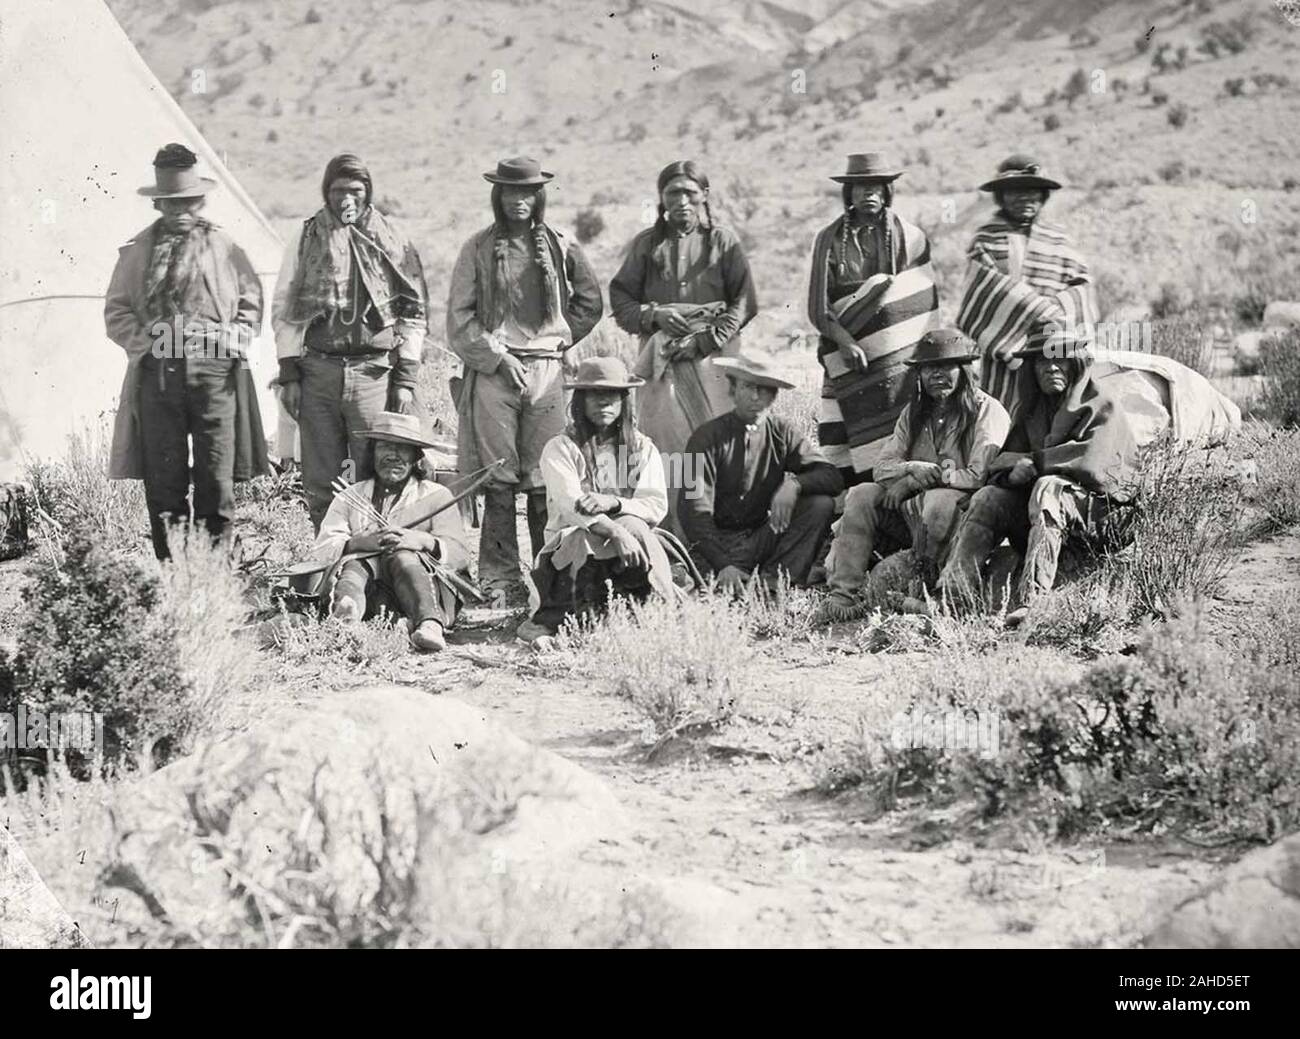 American West in vintage Photo 1860 s-1870 s Stockfoto